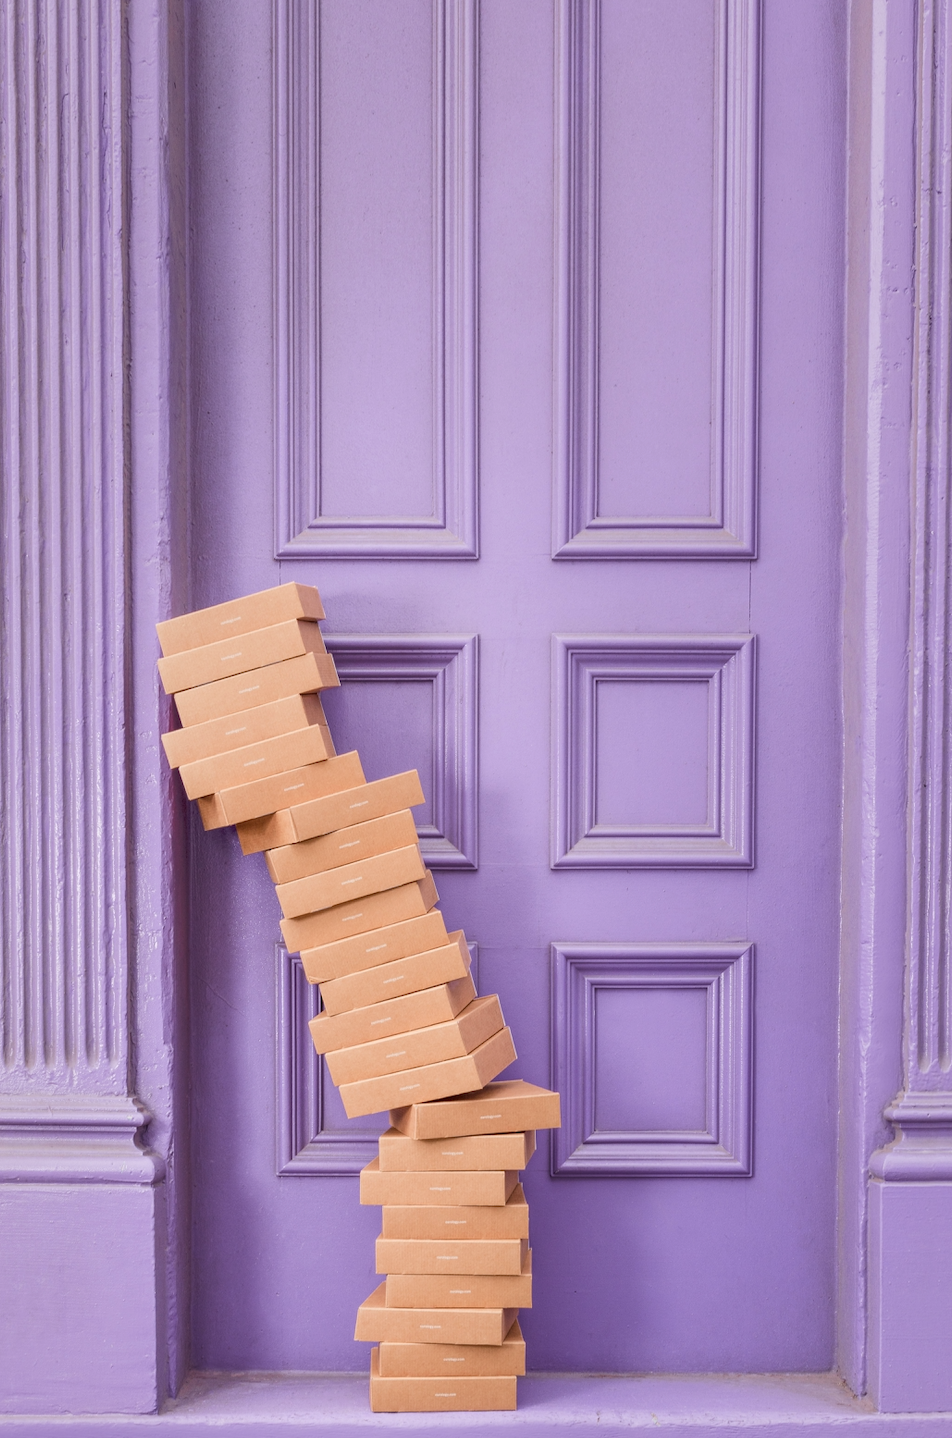 cardboard boxes stacked outside purple door